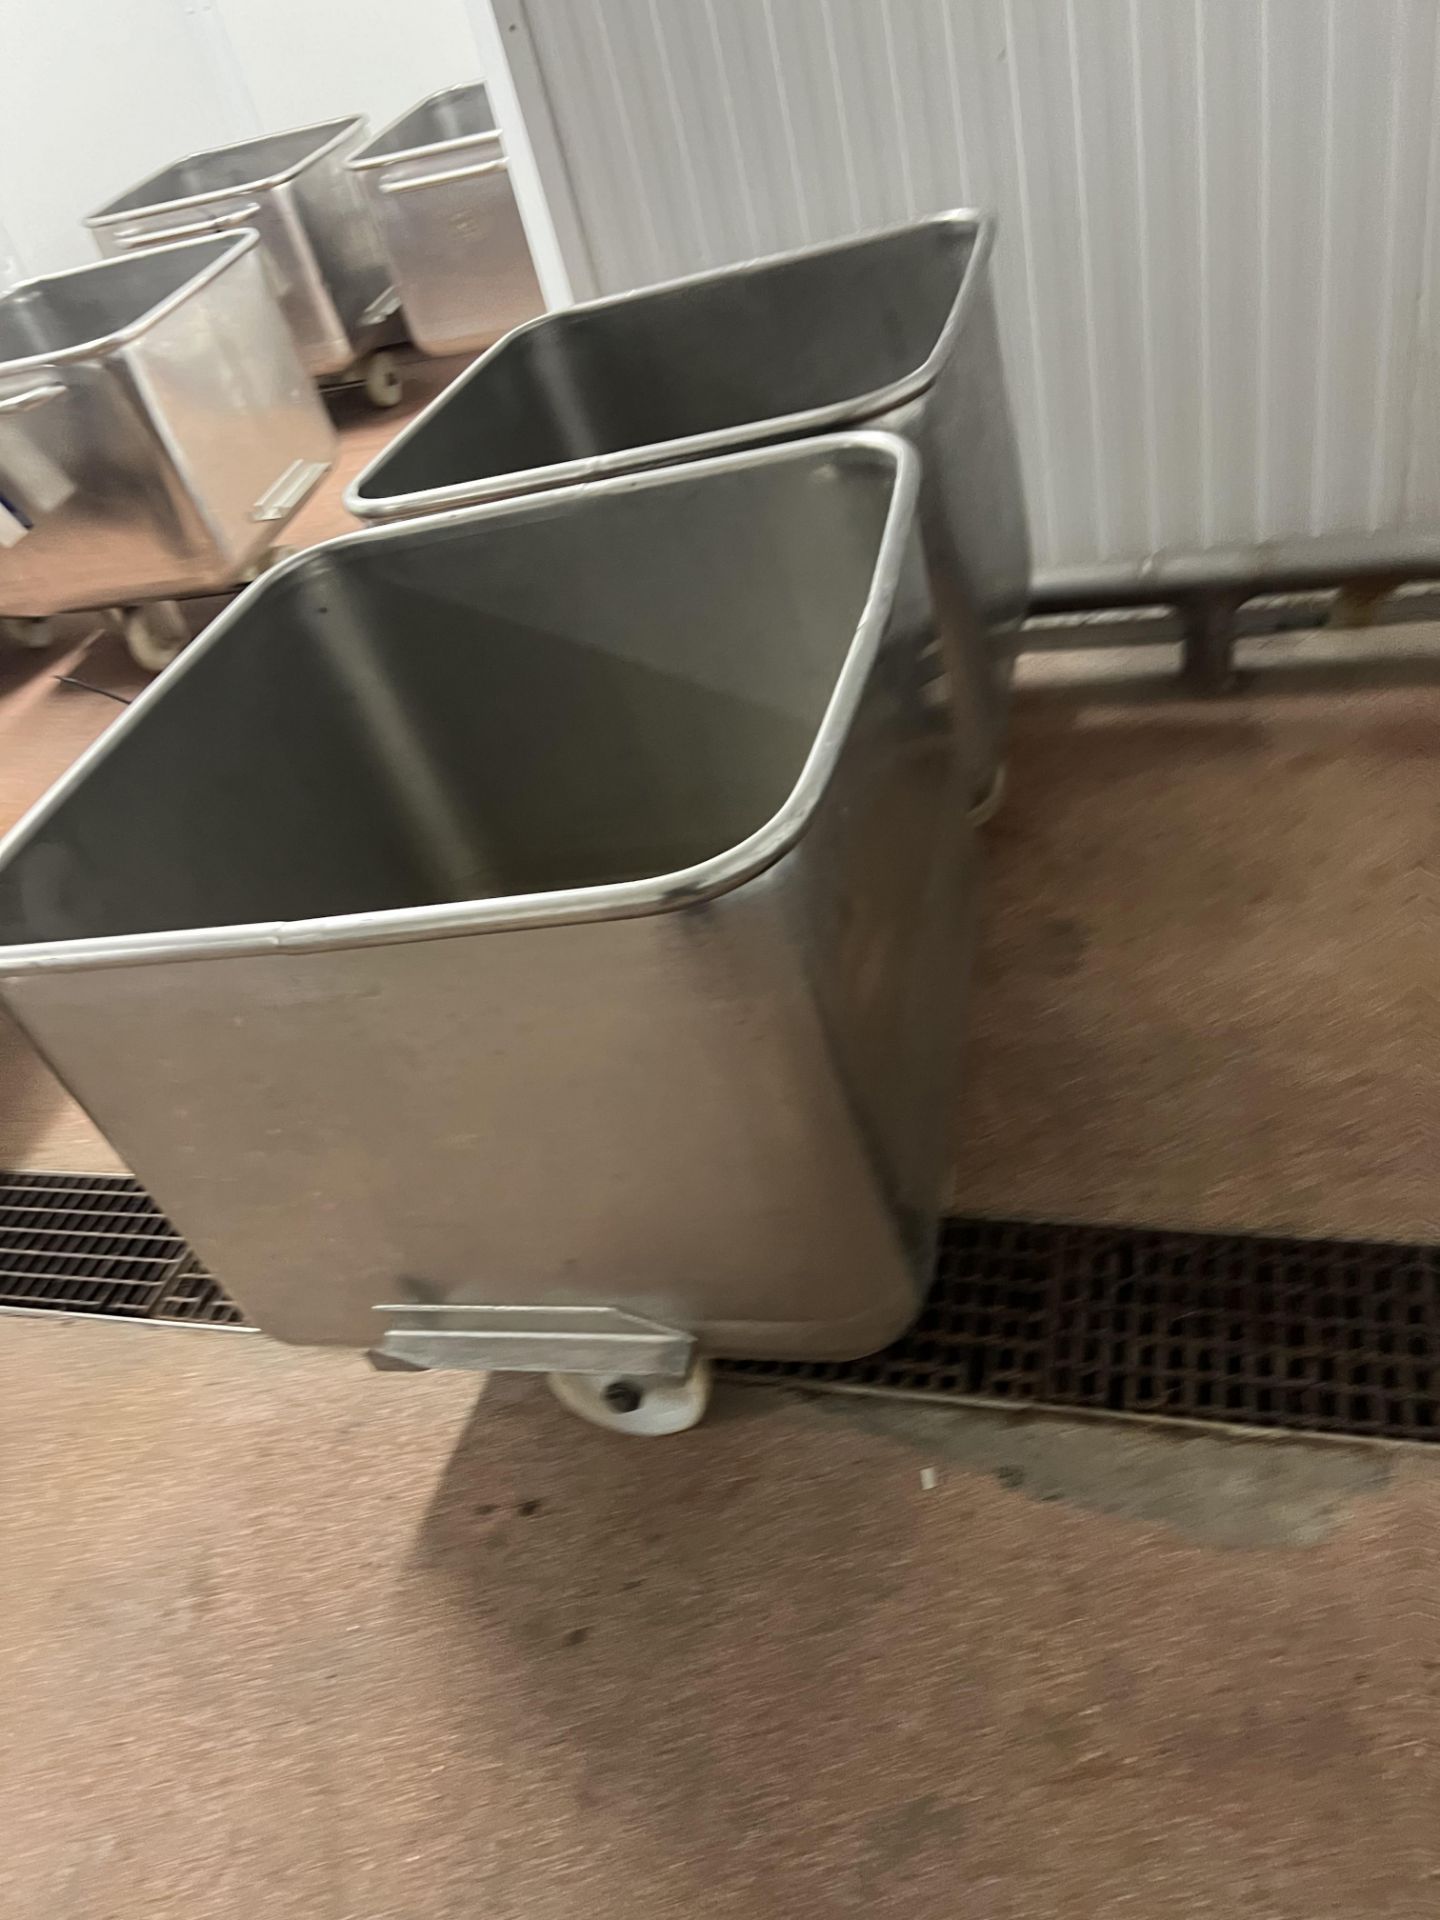 Two Tote Bins, lift out charge - £20 + VAT, lot located in Bury St Edmunds, Suffolk Please read - Bild 3 aus 3